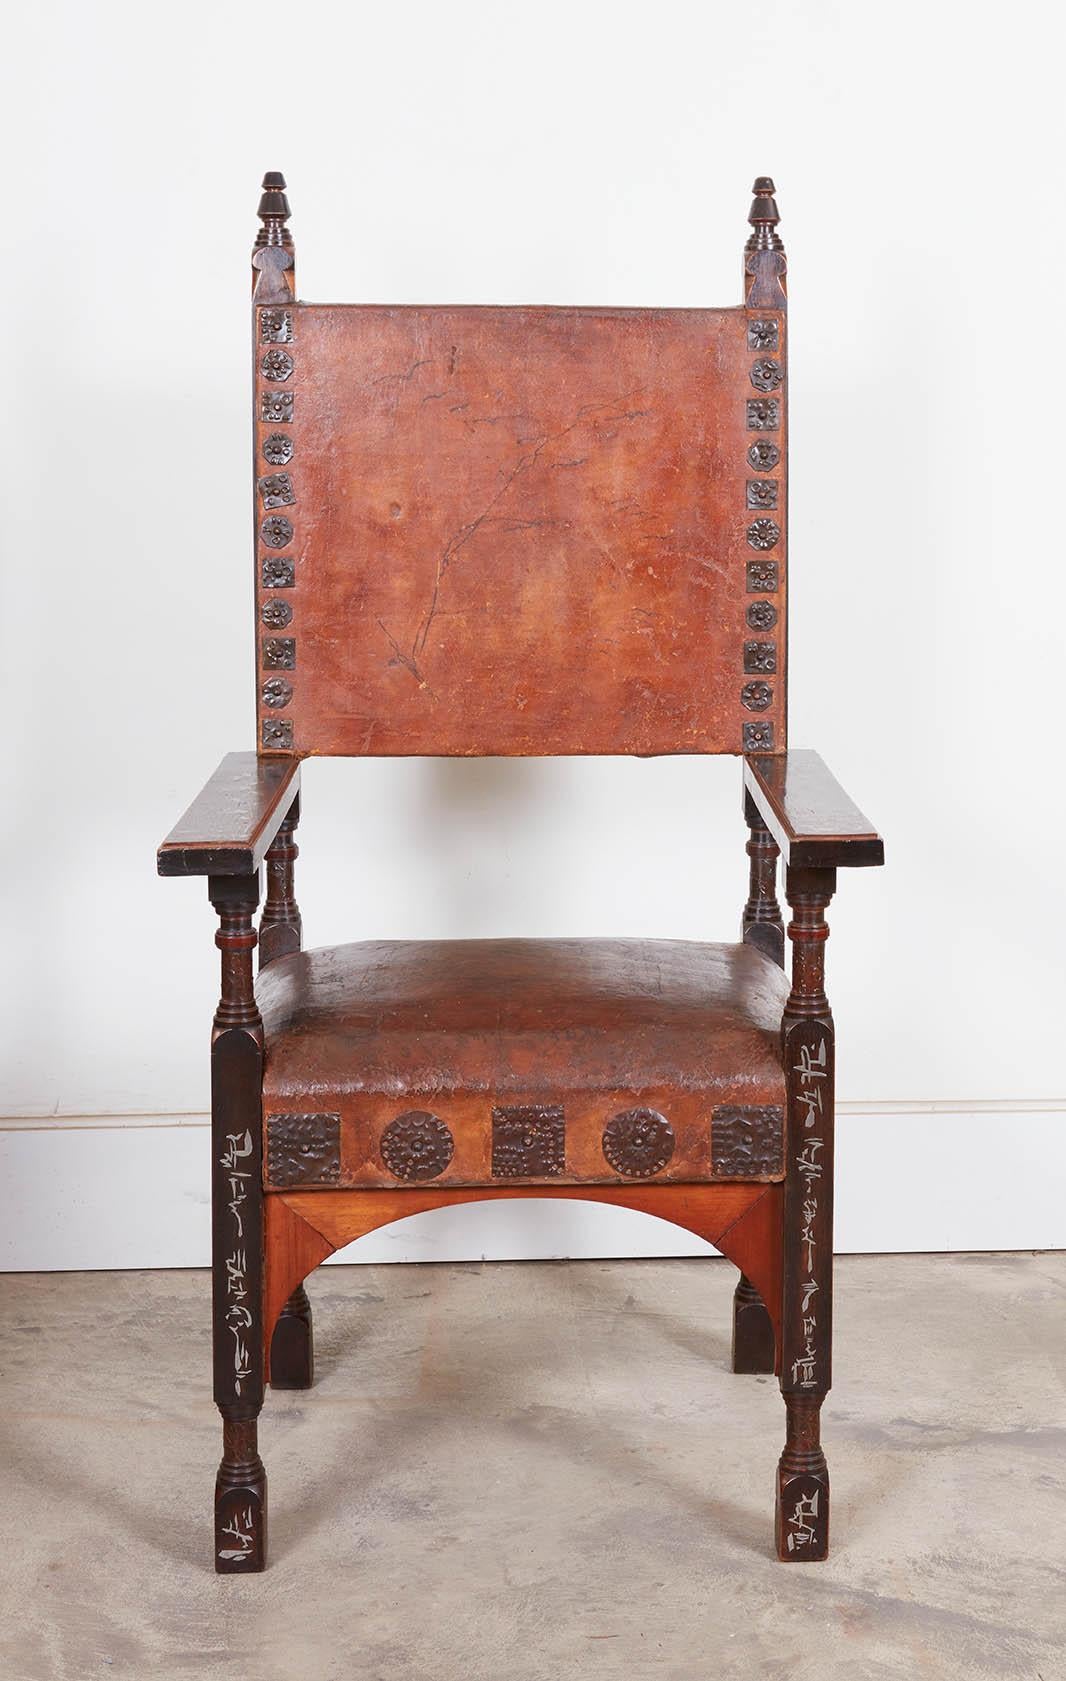 Walnut chair by Carlo Bugatti decorated with pewter and brass inlay and embossed copper, with period leather upholstery. Literature: Carlo-Rembrandt-Ettore-Jean Bugatti, Dejean, pg. 86 illustrates similar design. Italy: circa 1900 Provenance: